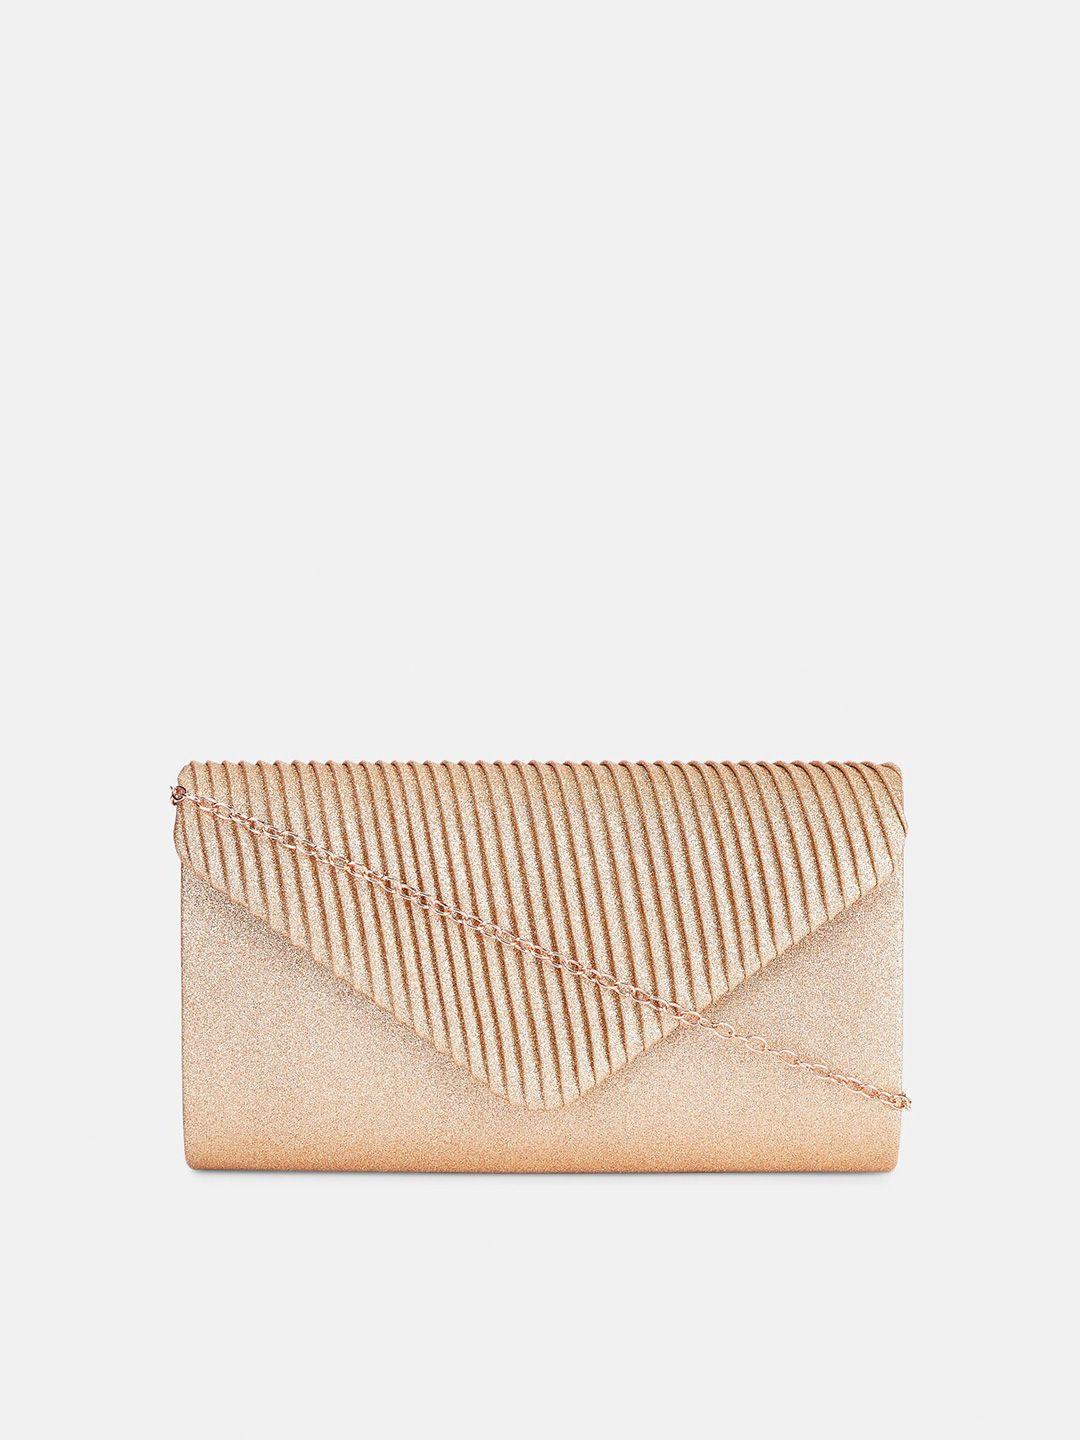 forever glam by pantaloons rose gold-toned textured envelope clutch